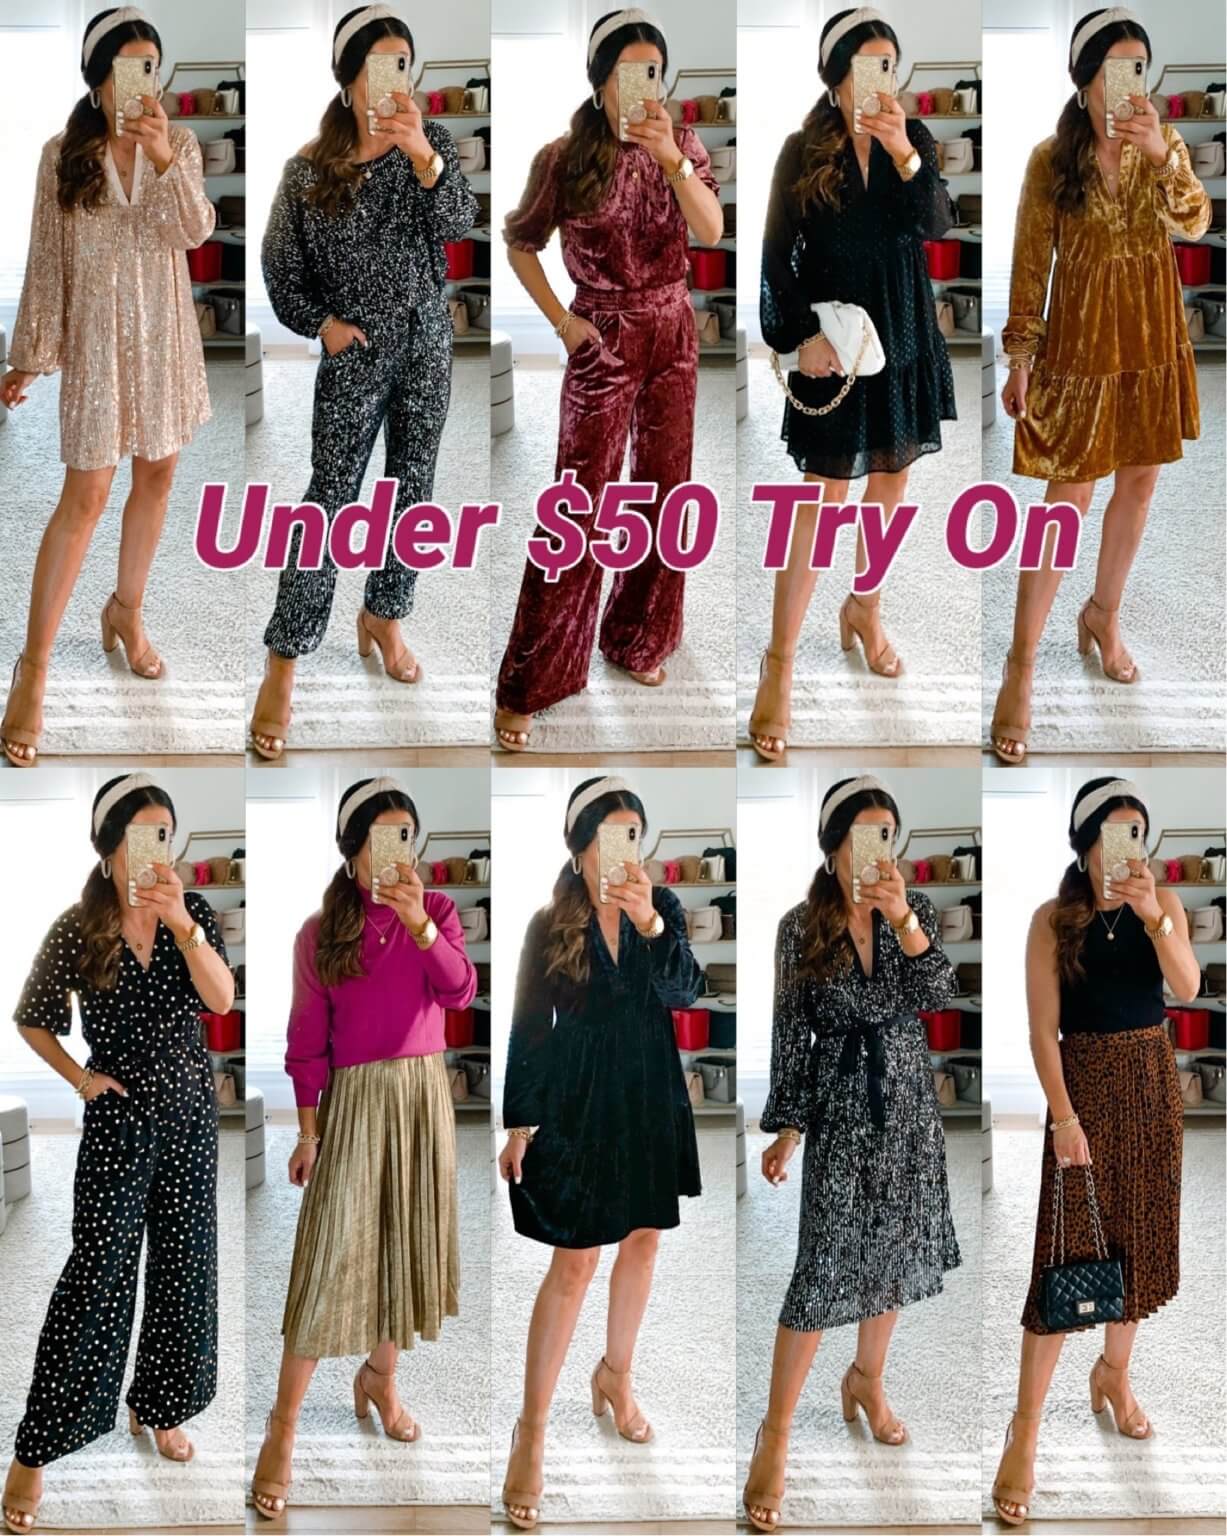 Under $50 Holiday Try On! - The Double Take Girls